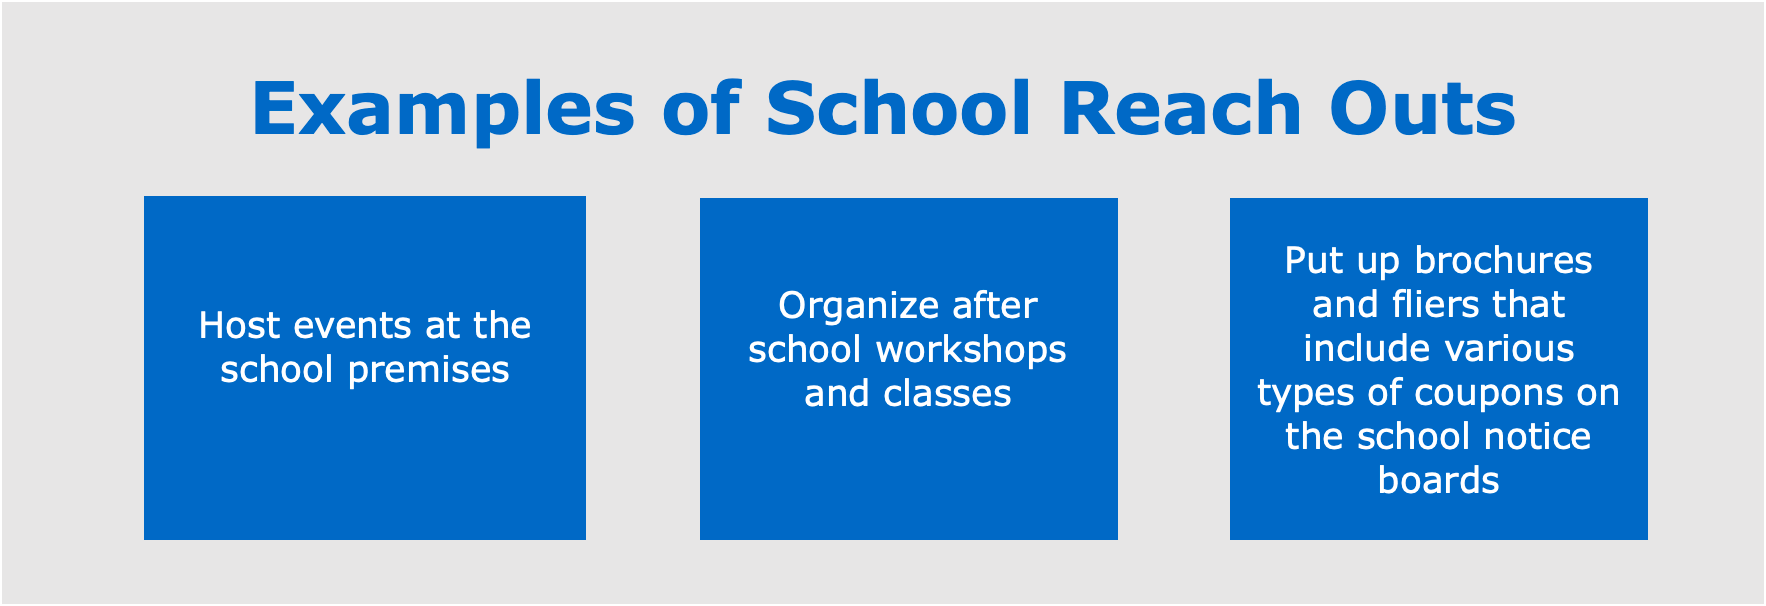 Examples of school reach outs